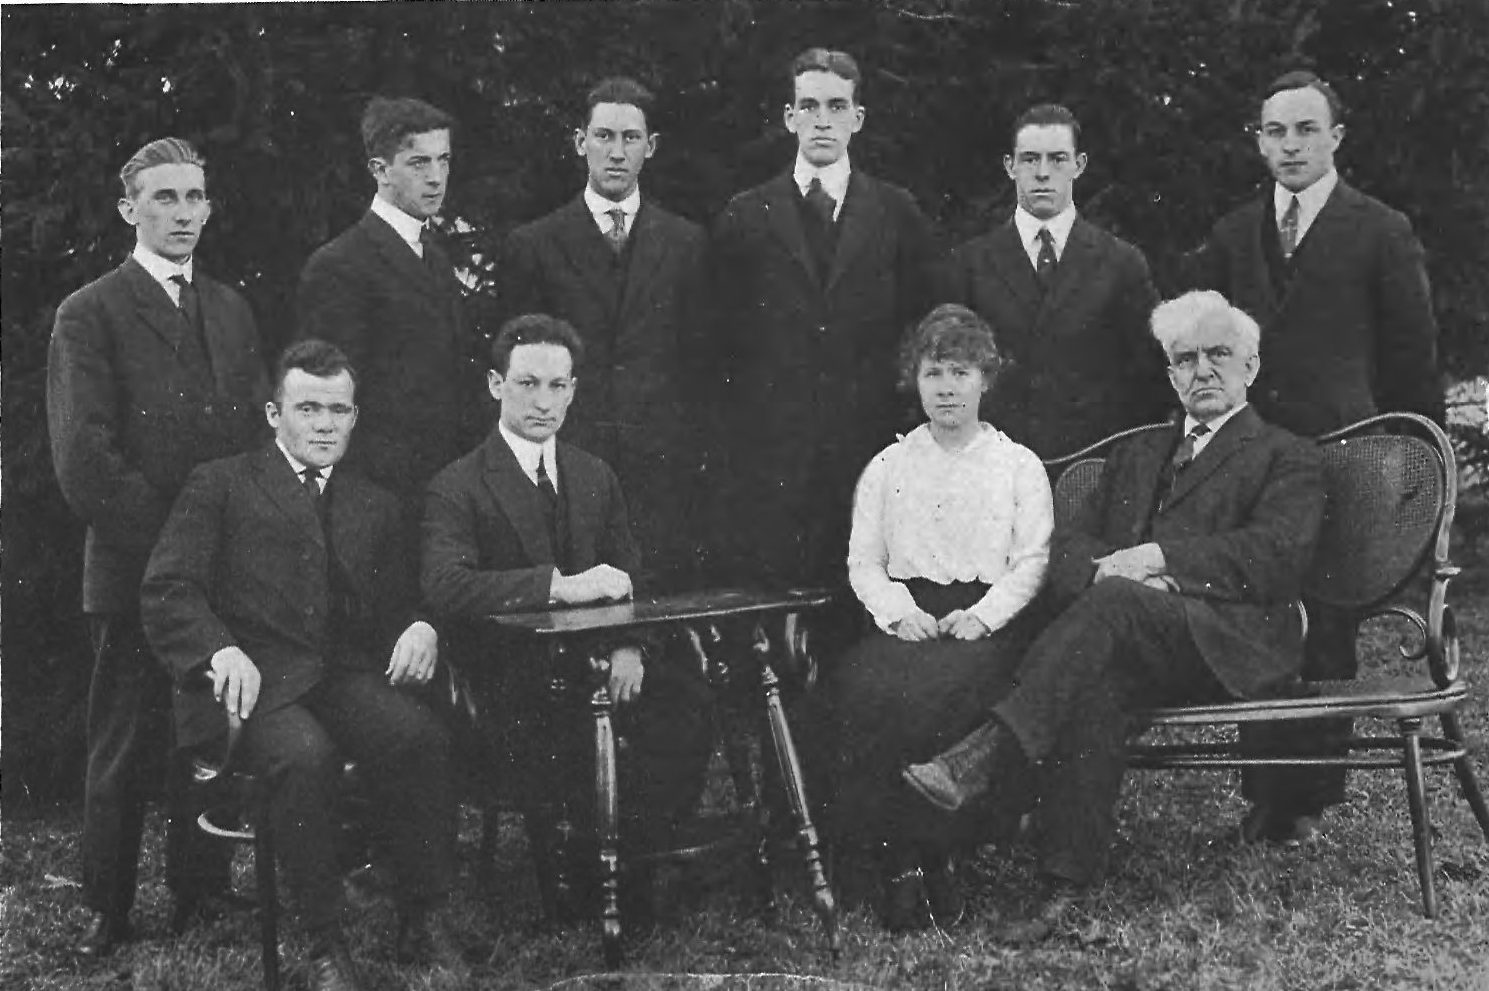 The Board of the Connecticut Campus, with faculty advisor Professor Henry Monteith seated front row right, from the 1915 Nutmeg Yearbook. (Archives & Special Collections, UConn Library)